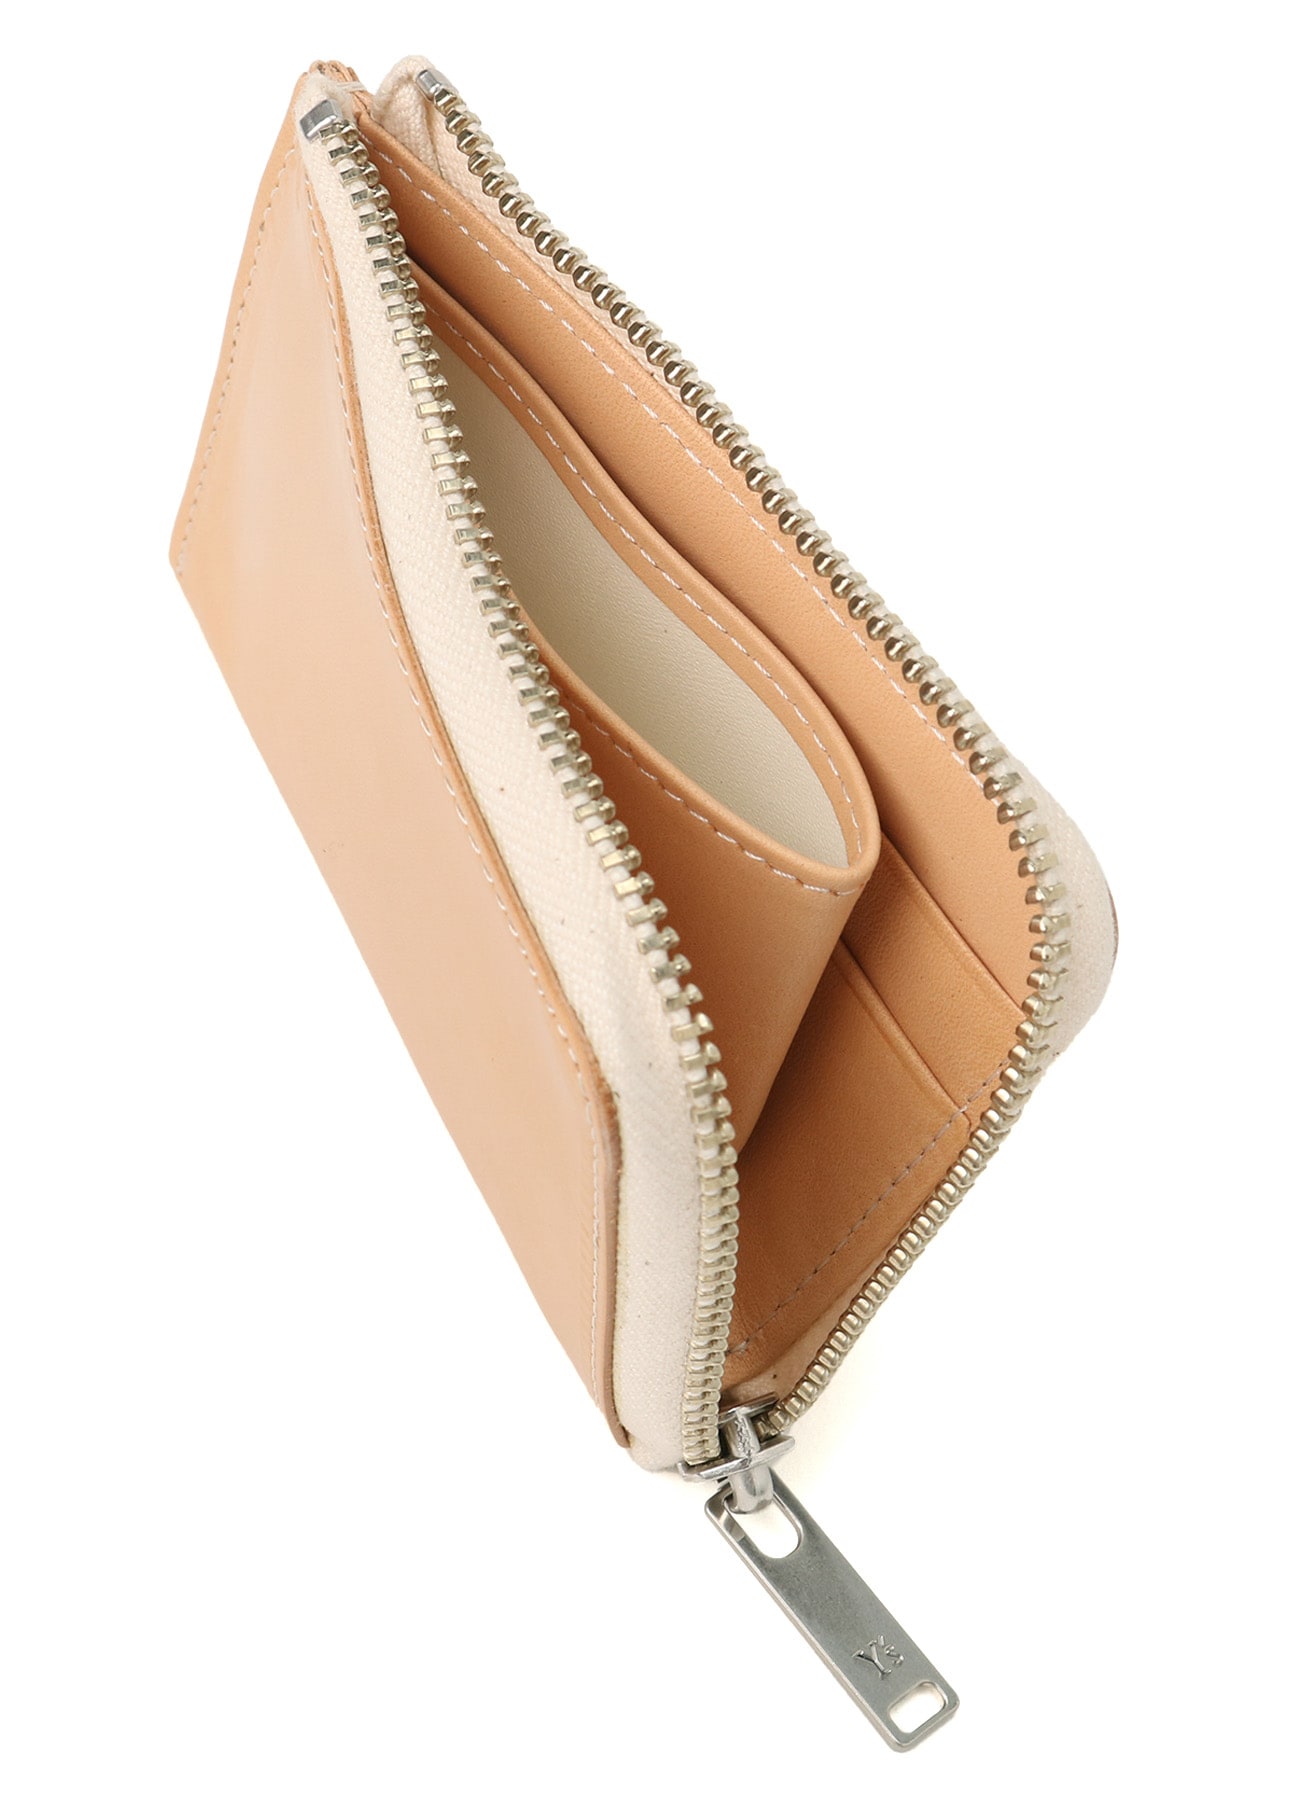 TANNED/ENAMEL-COATED LEATHER ZIPPERED CARD CASE(S Beige): Vintage